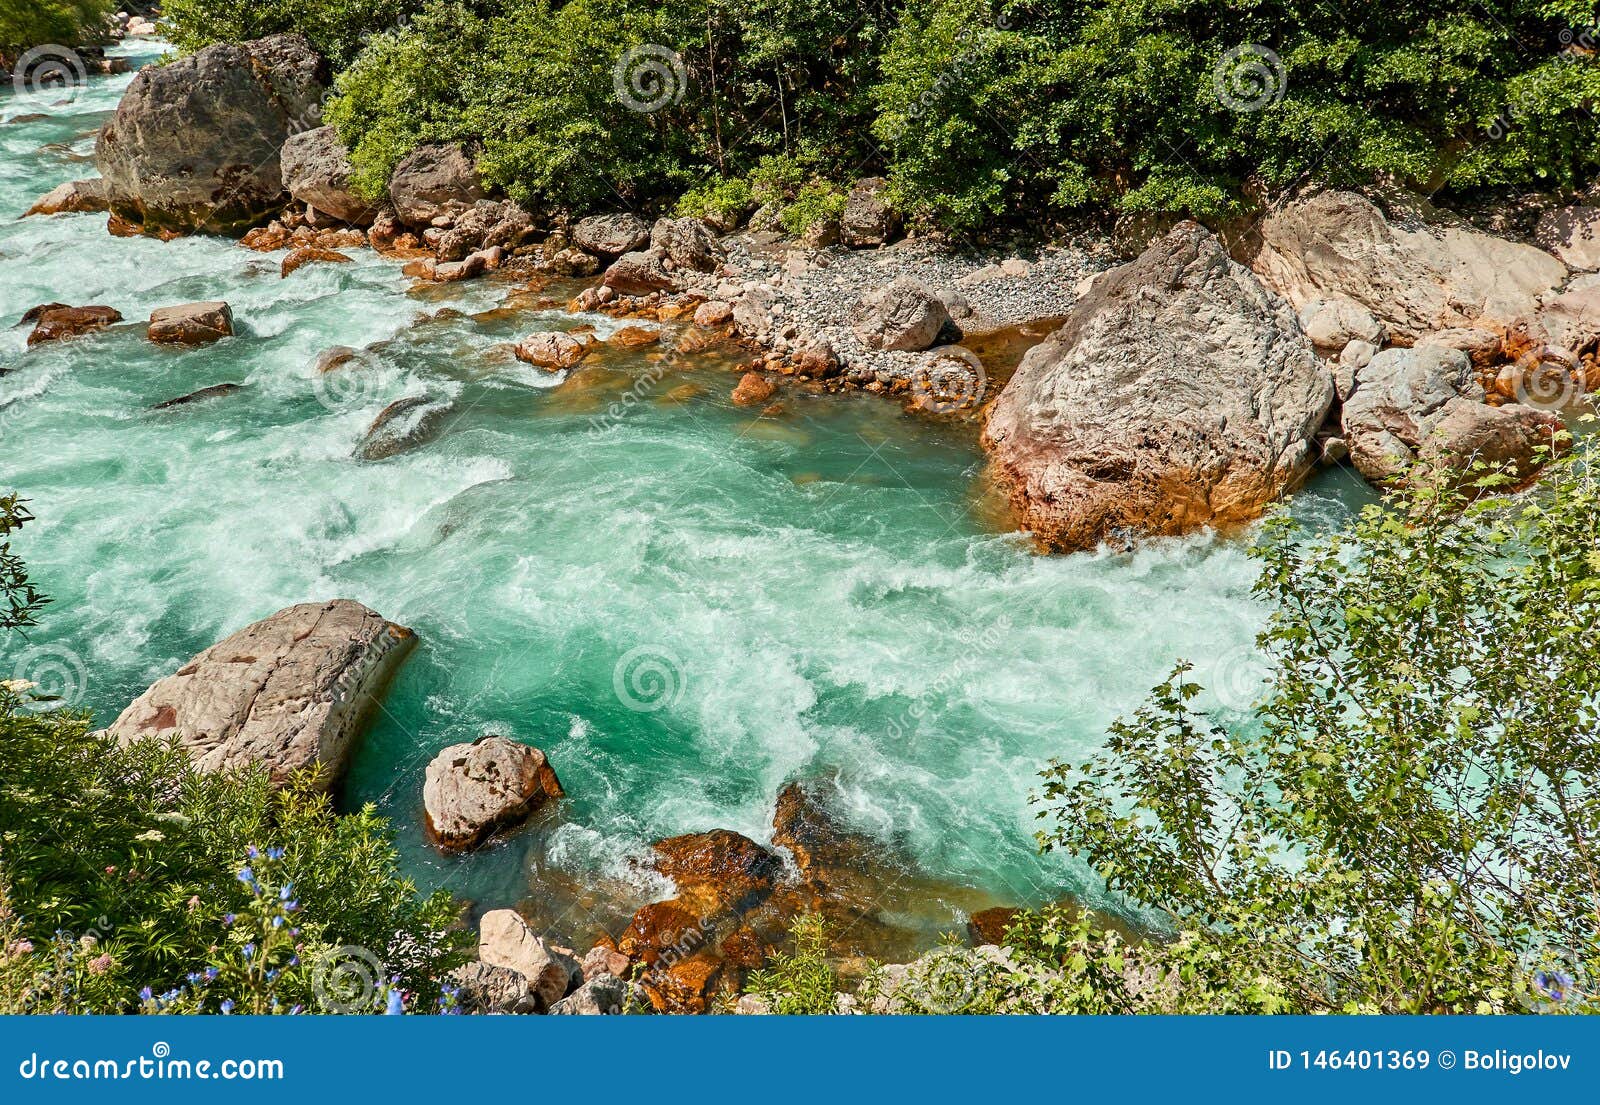 Mountain Fresh and Cold River in Summer Time Under Cloudy Sunny Blue ...